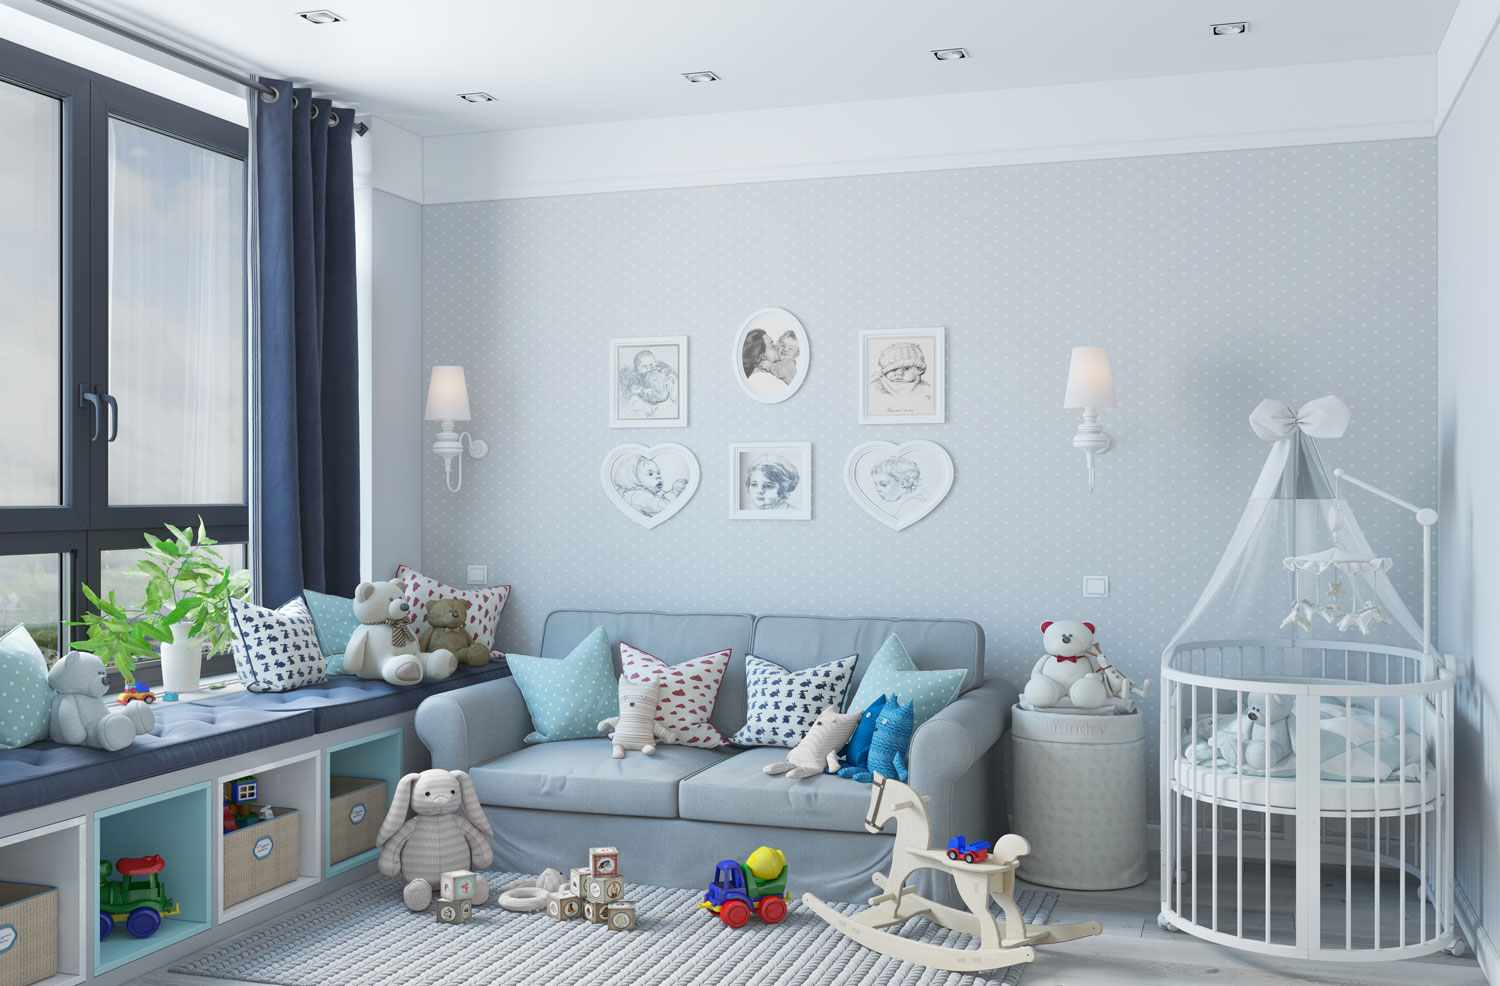 an example of a beautiful style of a children's room